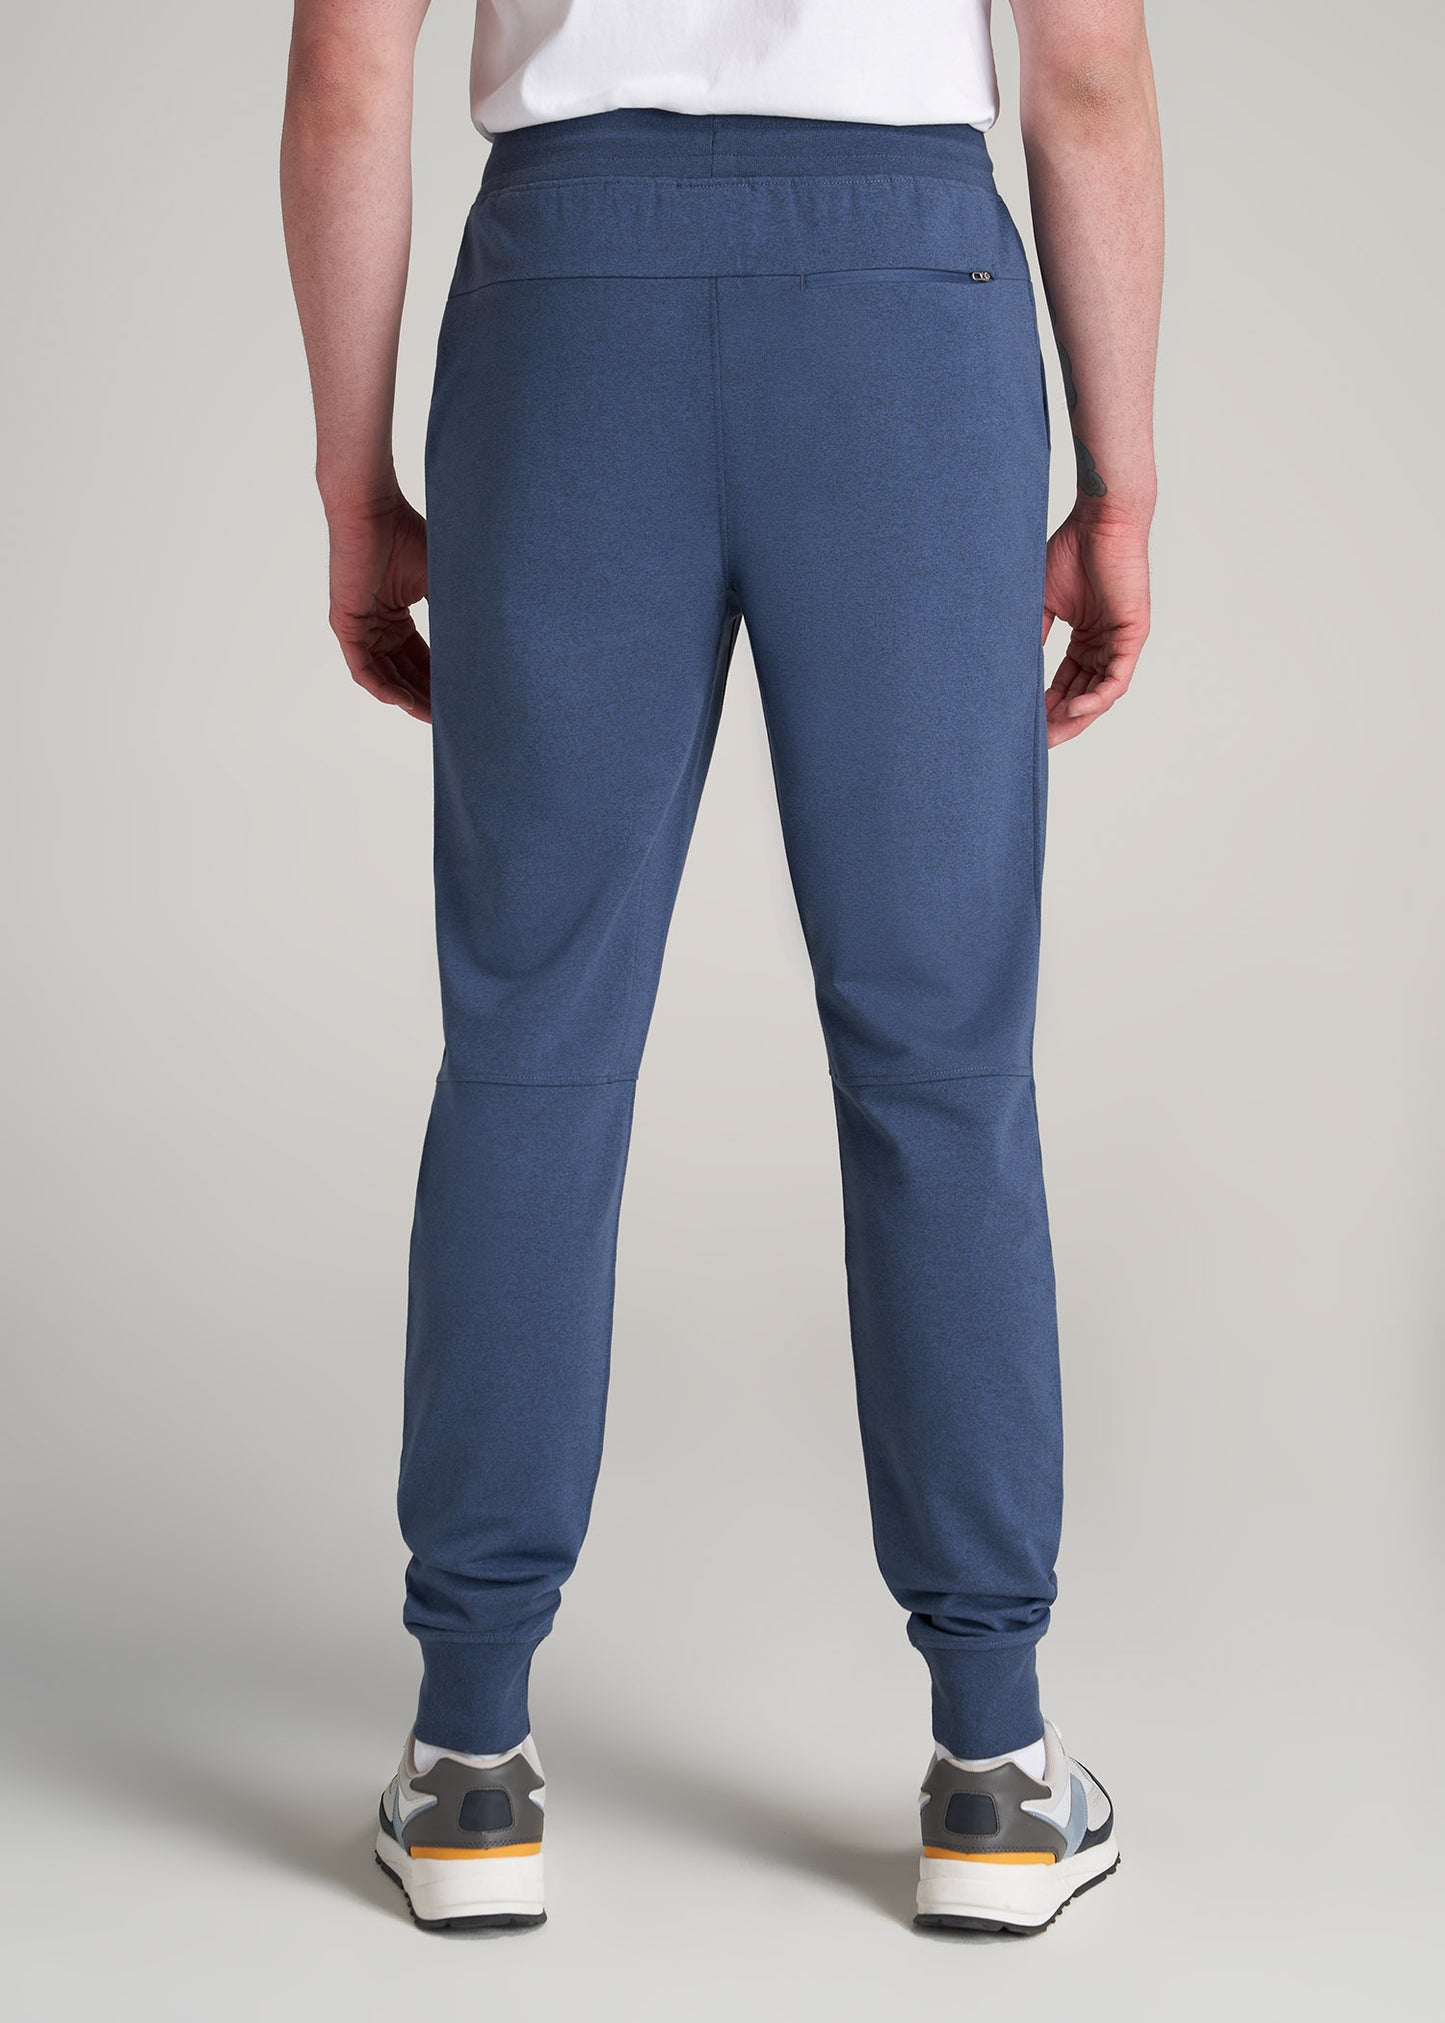 Slim Joggers for Tall Men: Navy Mix Slim French Terry Joggers